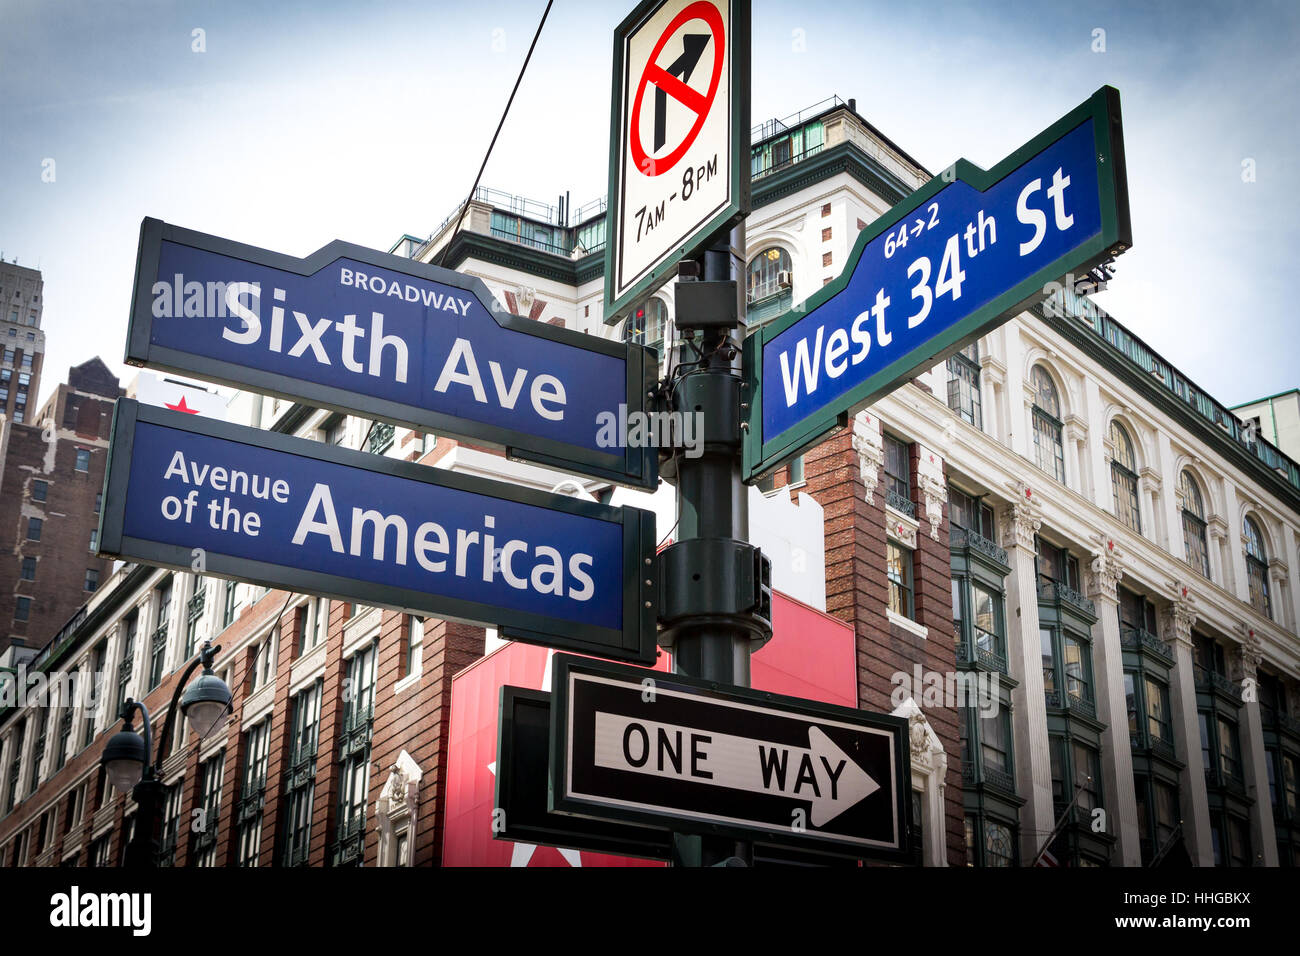 Intersection signs of Broadway, Sixth Avenue and West 34th Street near Herald Square in Midtown Manhattan, New York City NYC Stock Photo